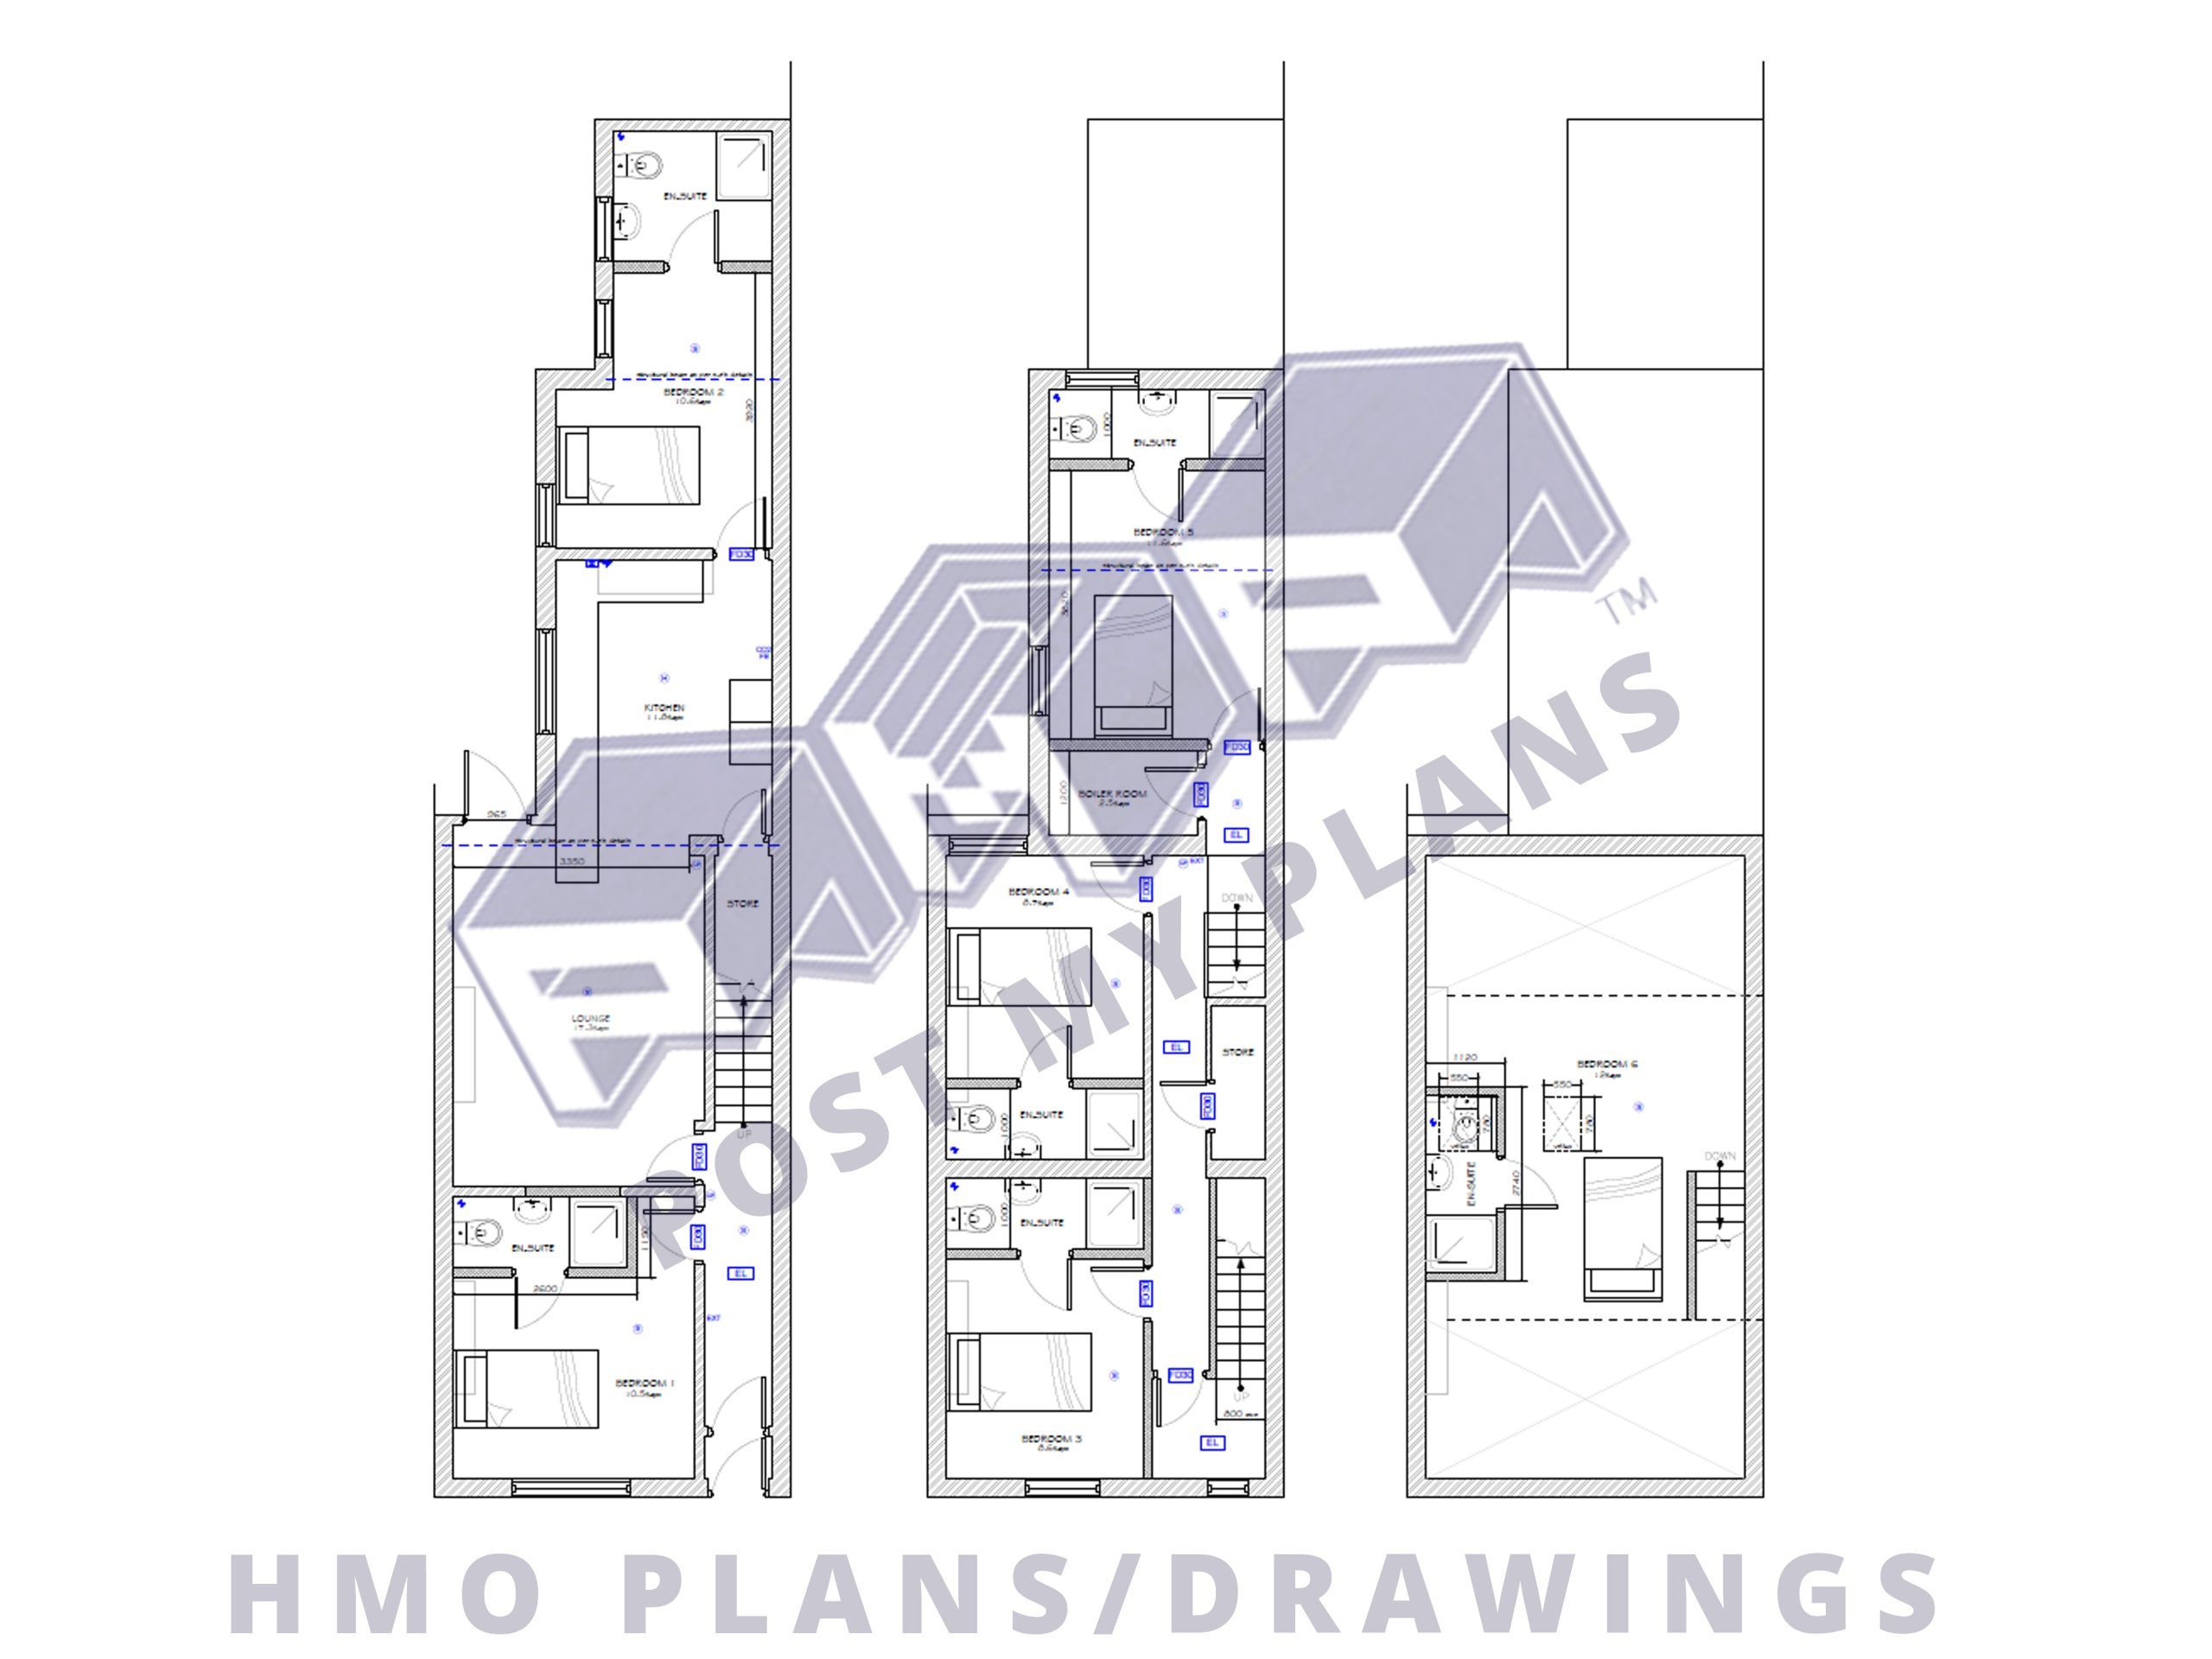 hmo plans and drawings scaled 6a6254c0